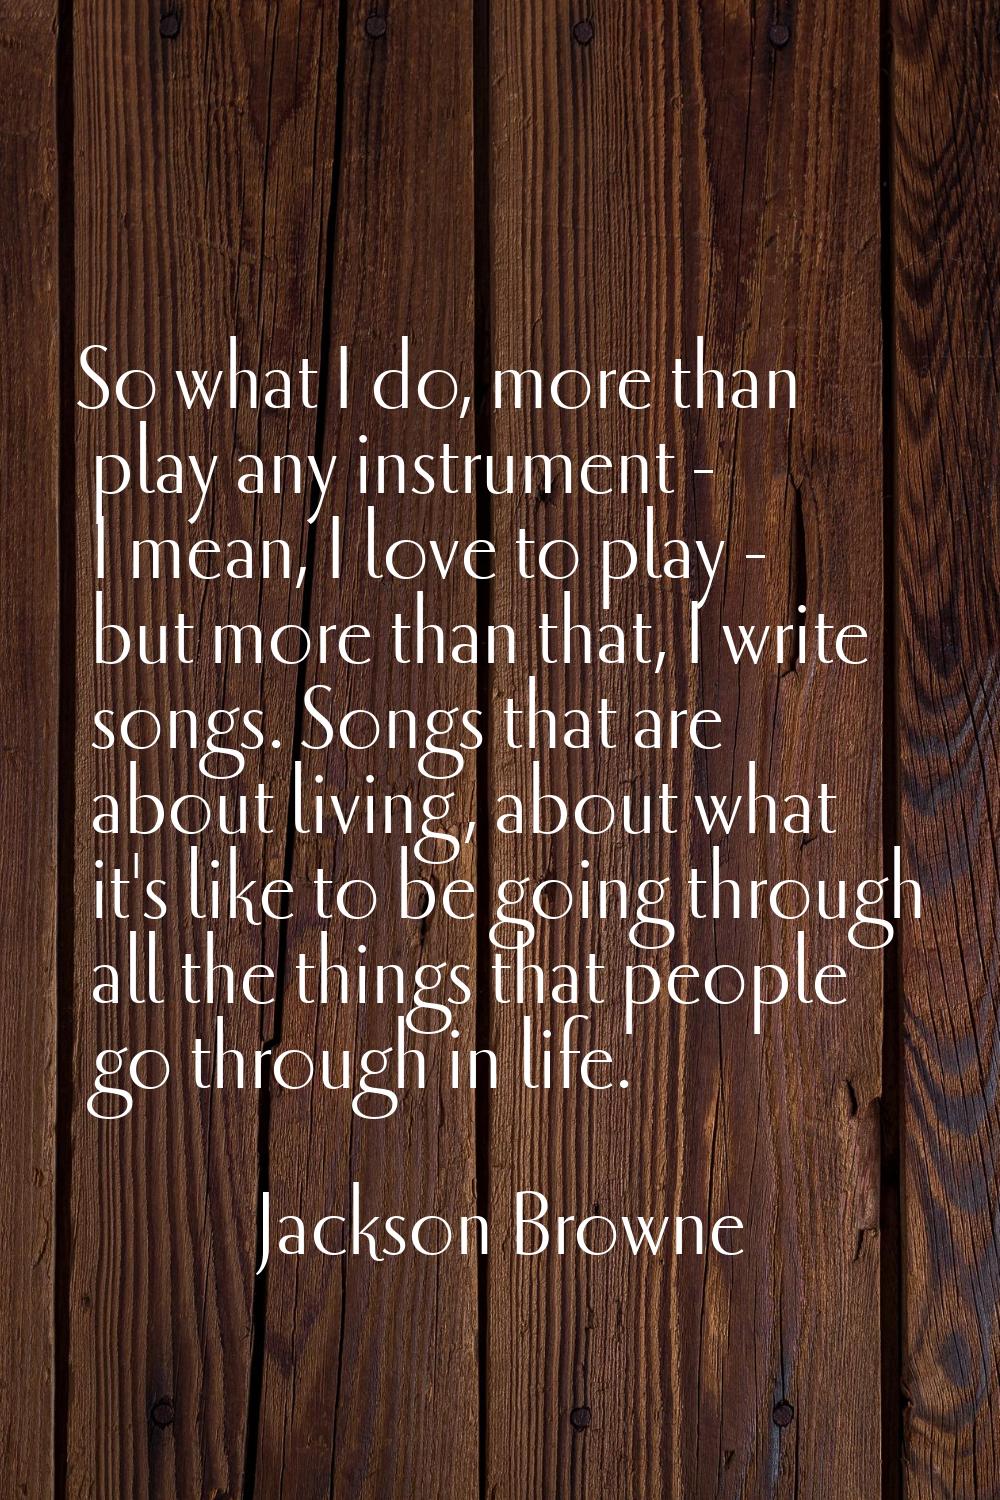 So what I do, more than play any instrument - I mean, I love to play - but more than that, I write 